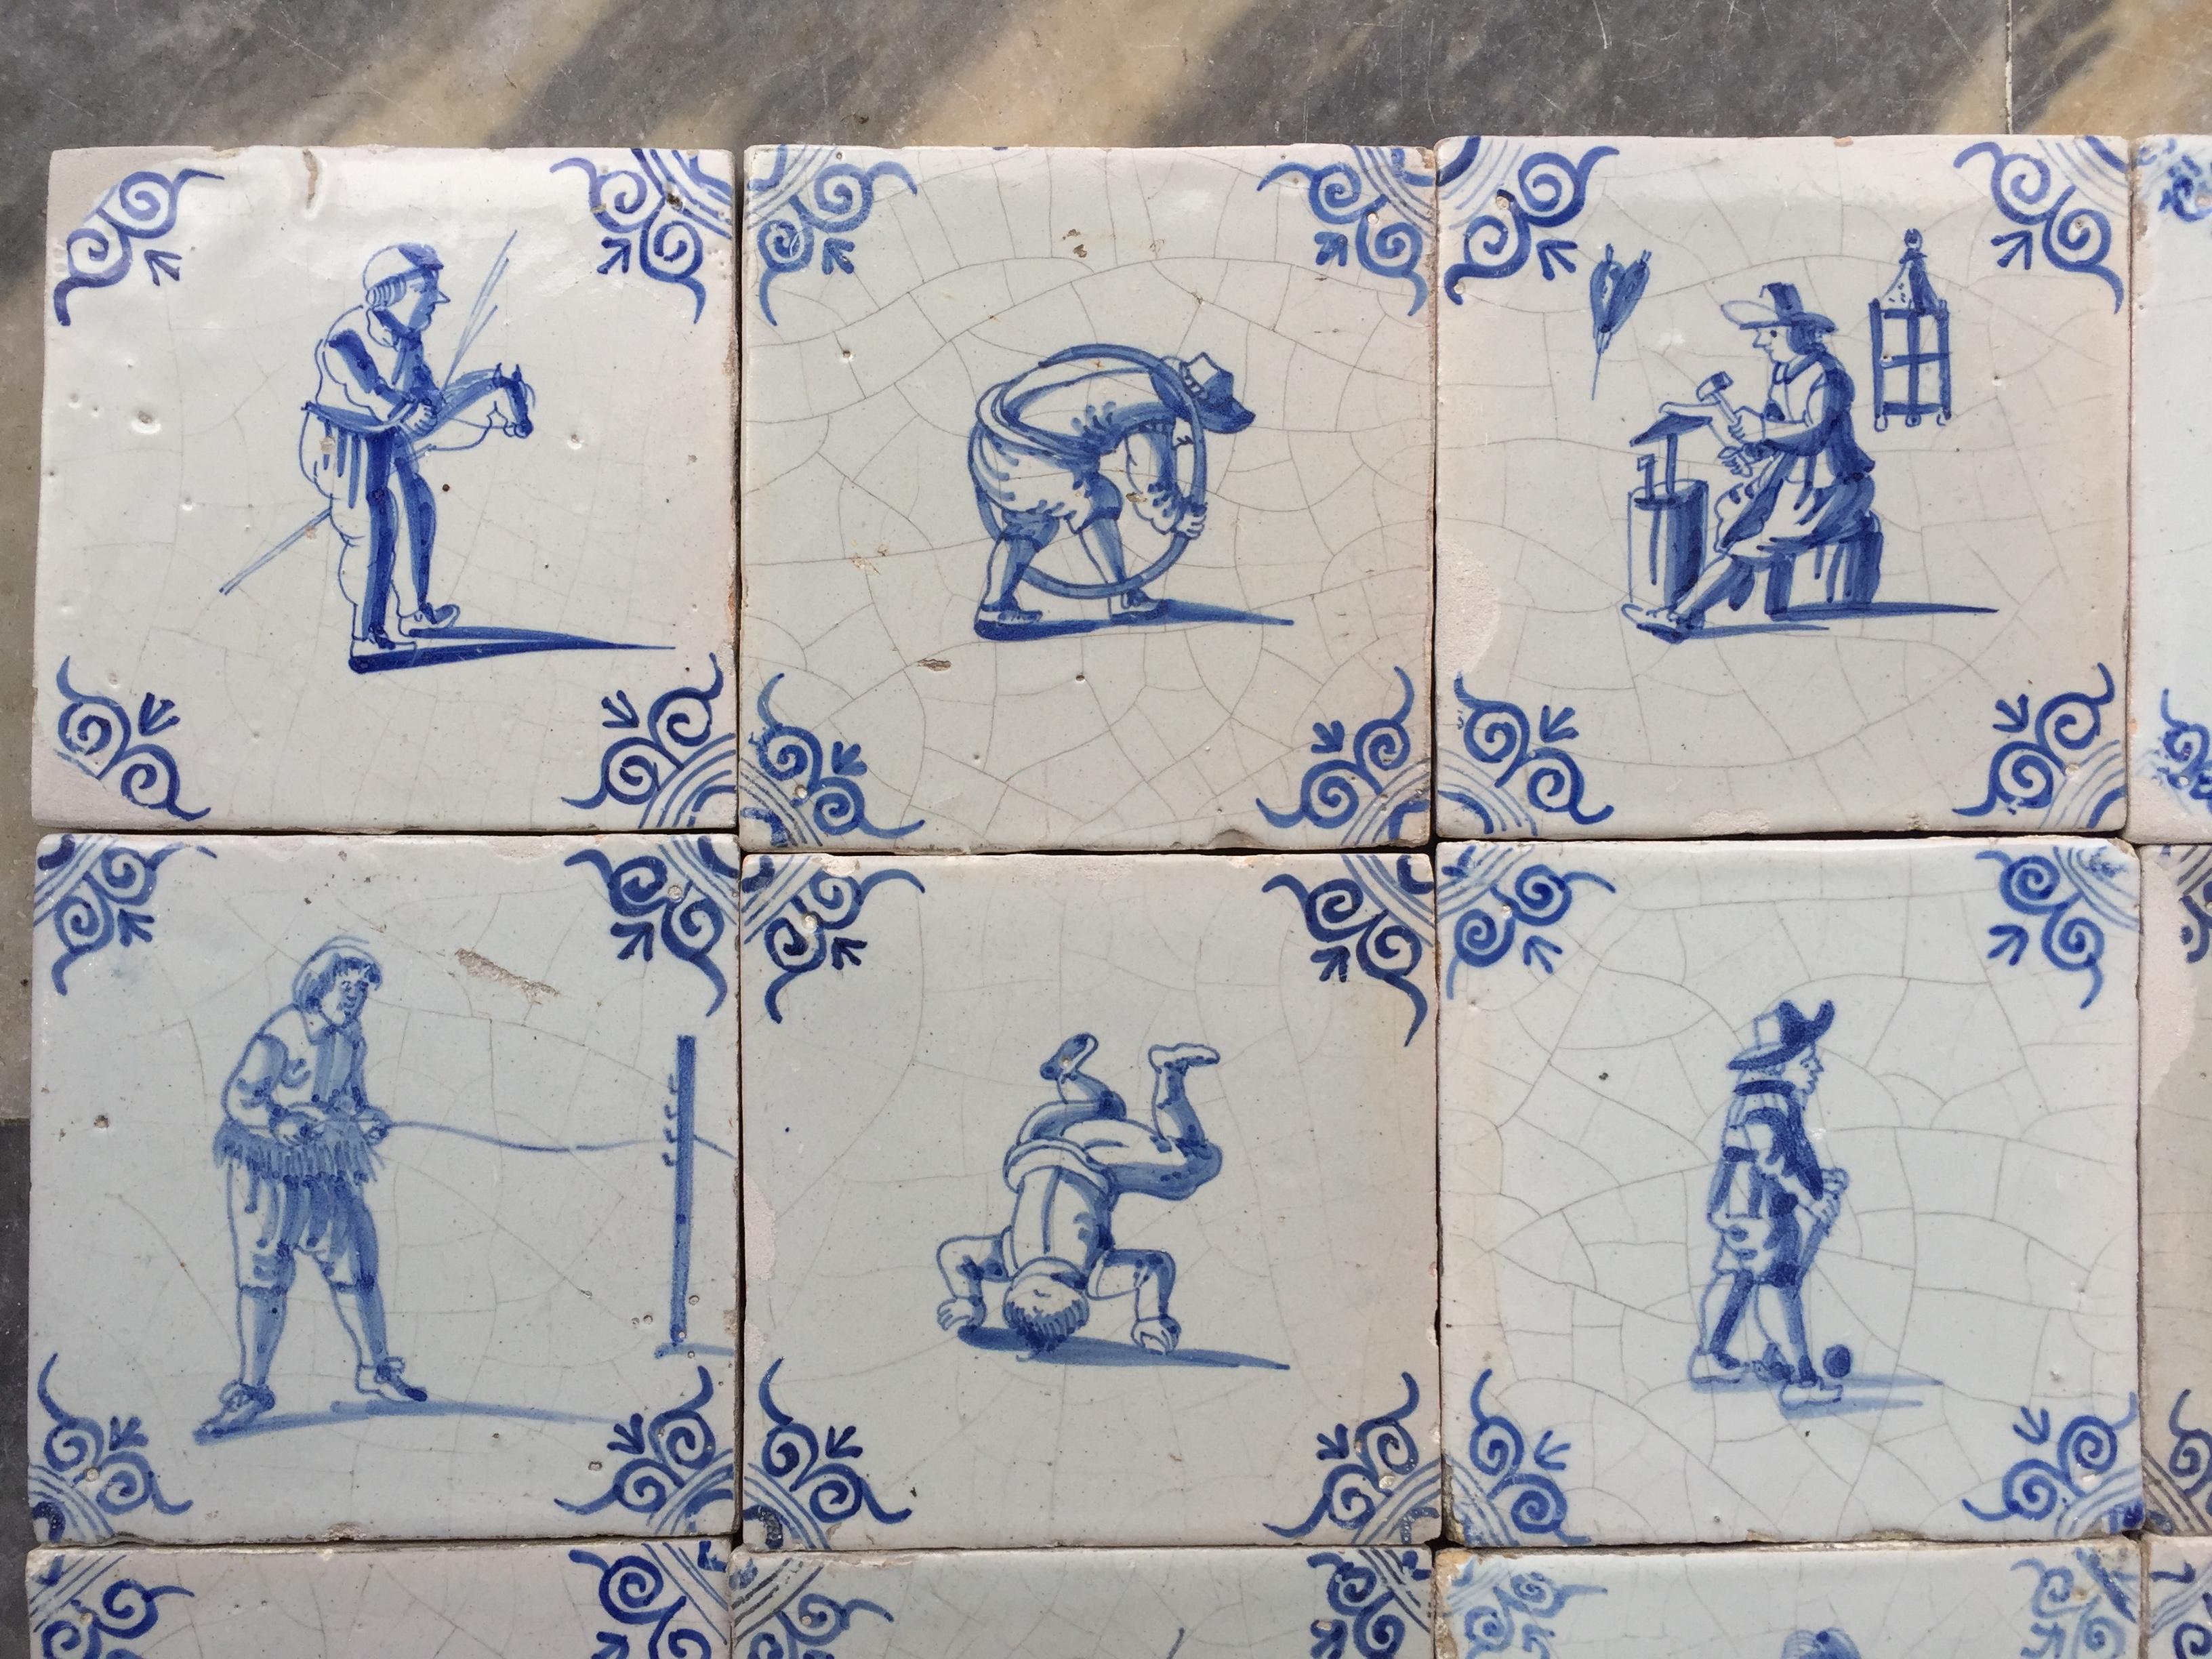 A set of 20 blue and white Dutch Delft tiles with figures and craftsmen. 
Made in The Netherlands.
Circa 1630 - 1660.

This set of tiles is of fine quality and has a bright glaze, characteristic for the tile production of the 17th century. Also, the